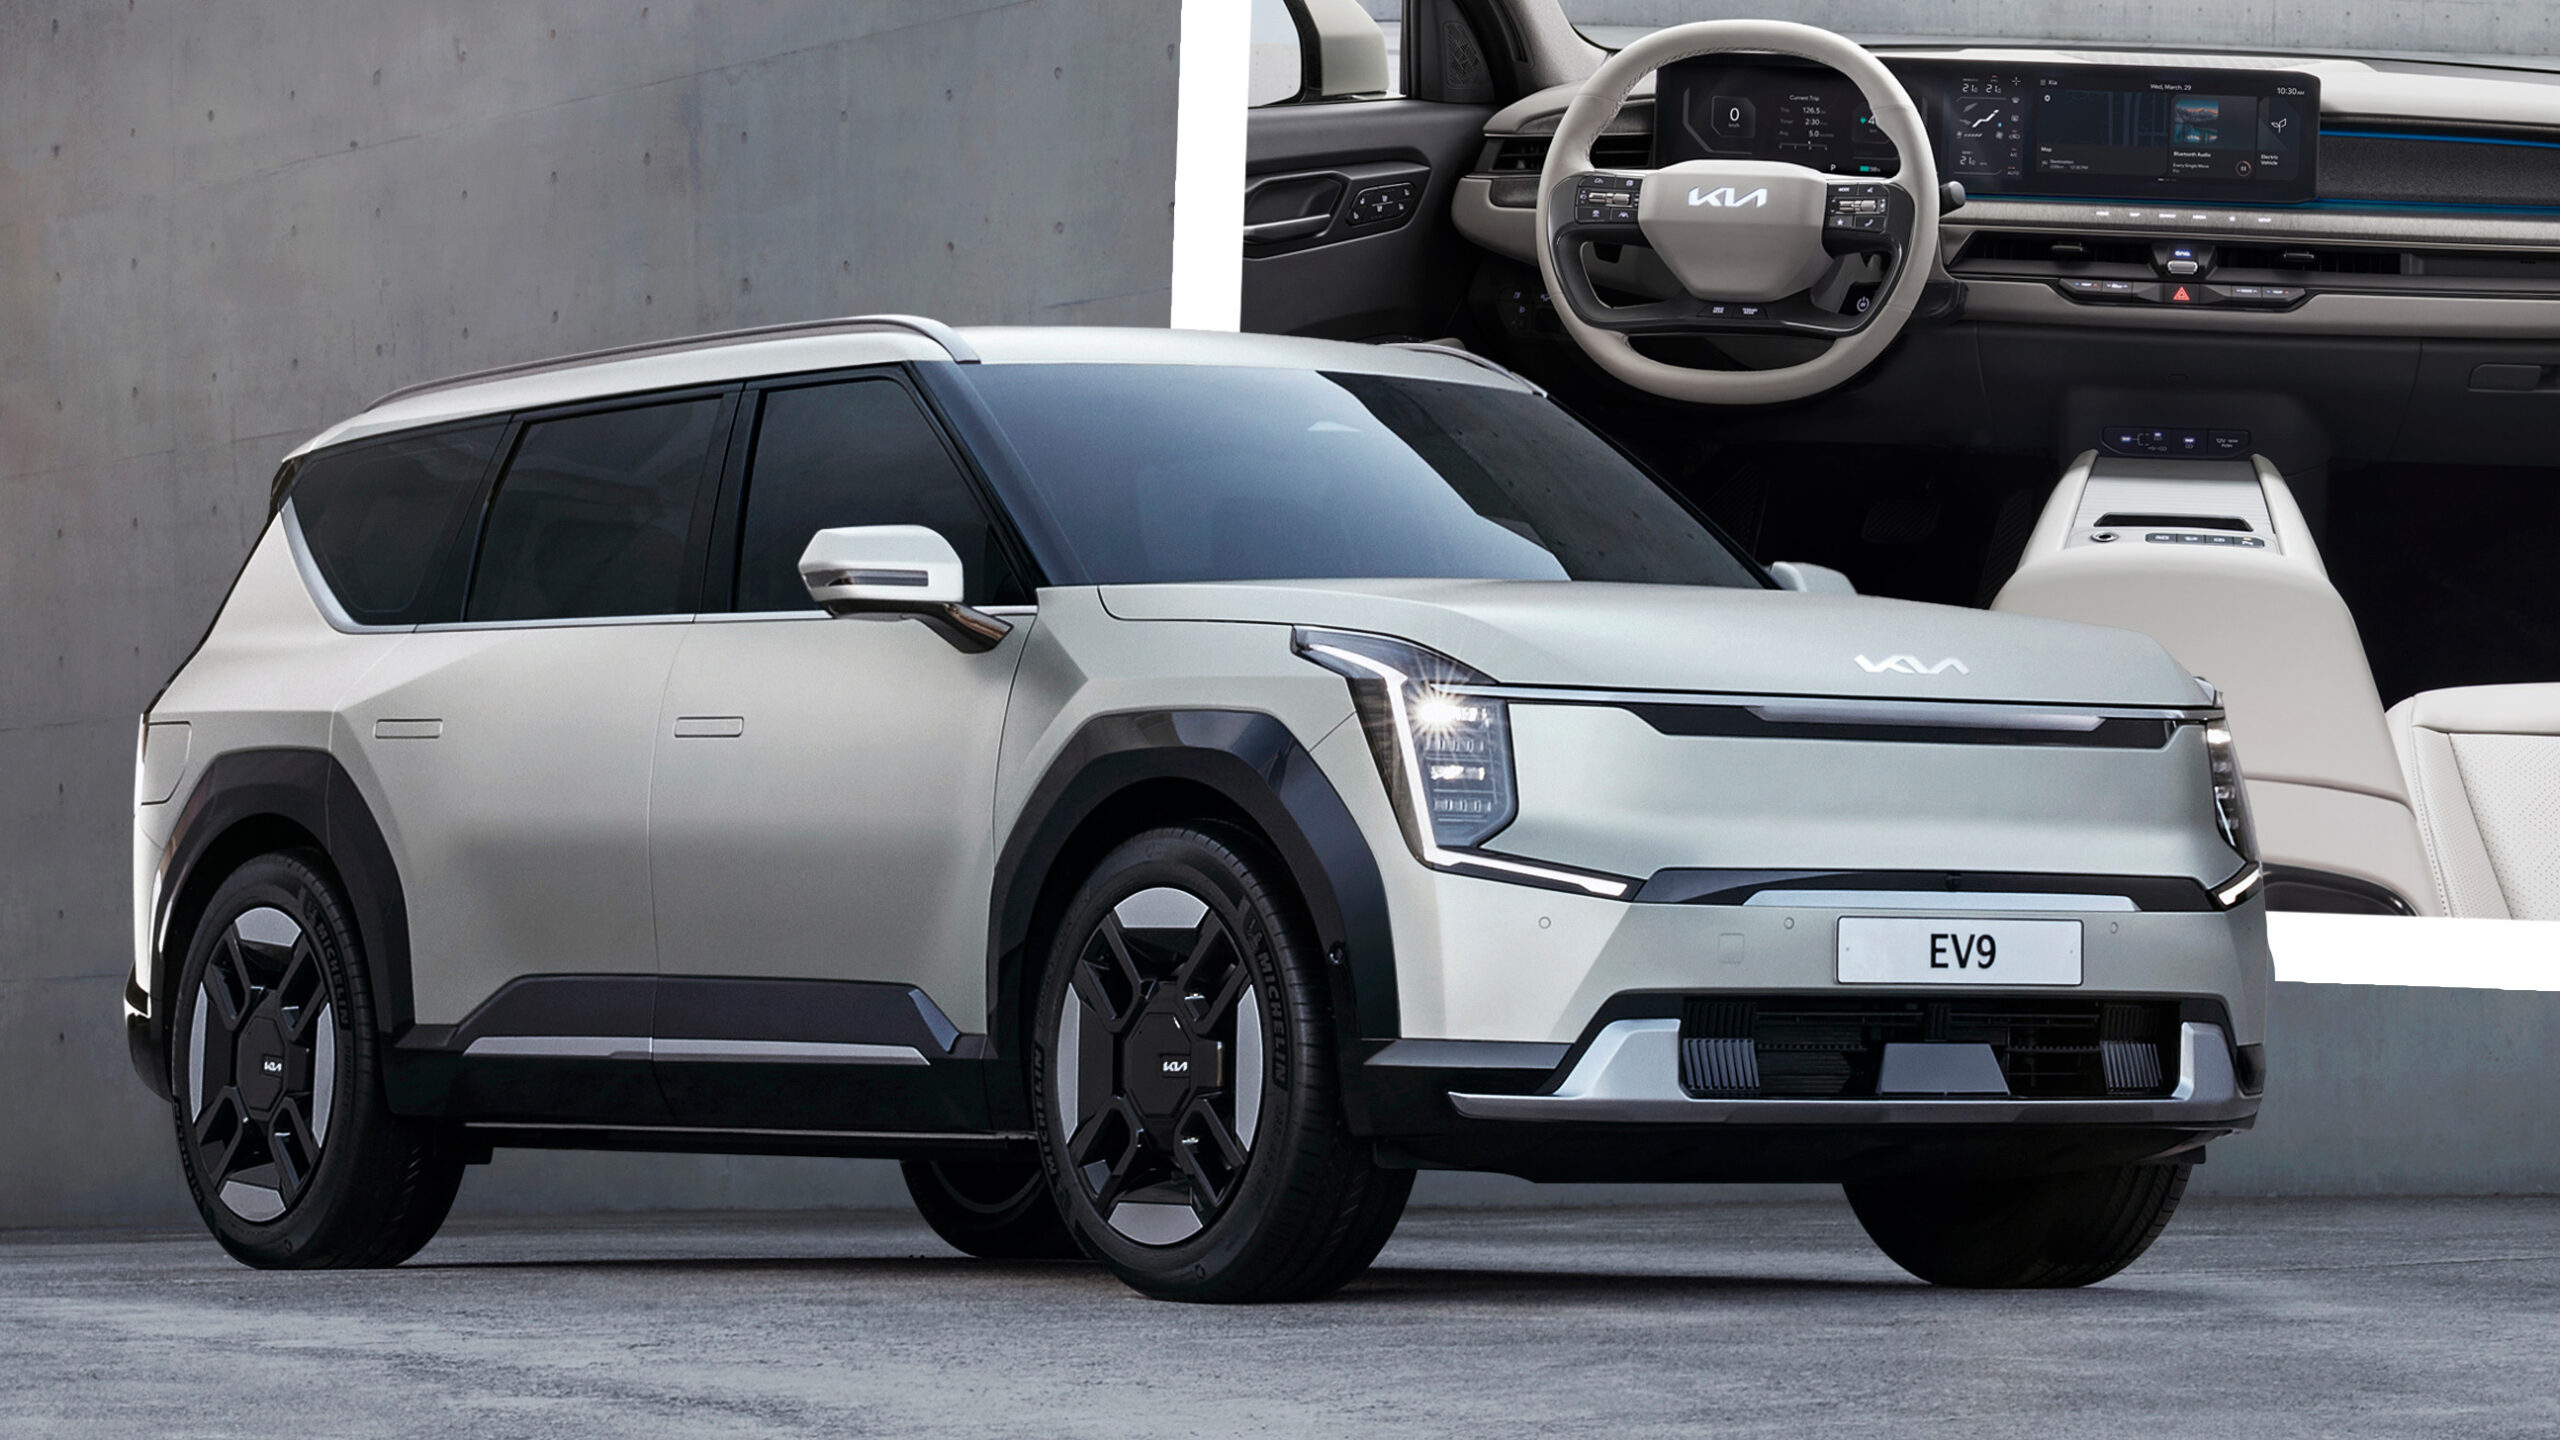 2024 Kia EV9 SUV Debuts With Concept Looks, Swiveling Seats And 3rd Row